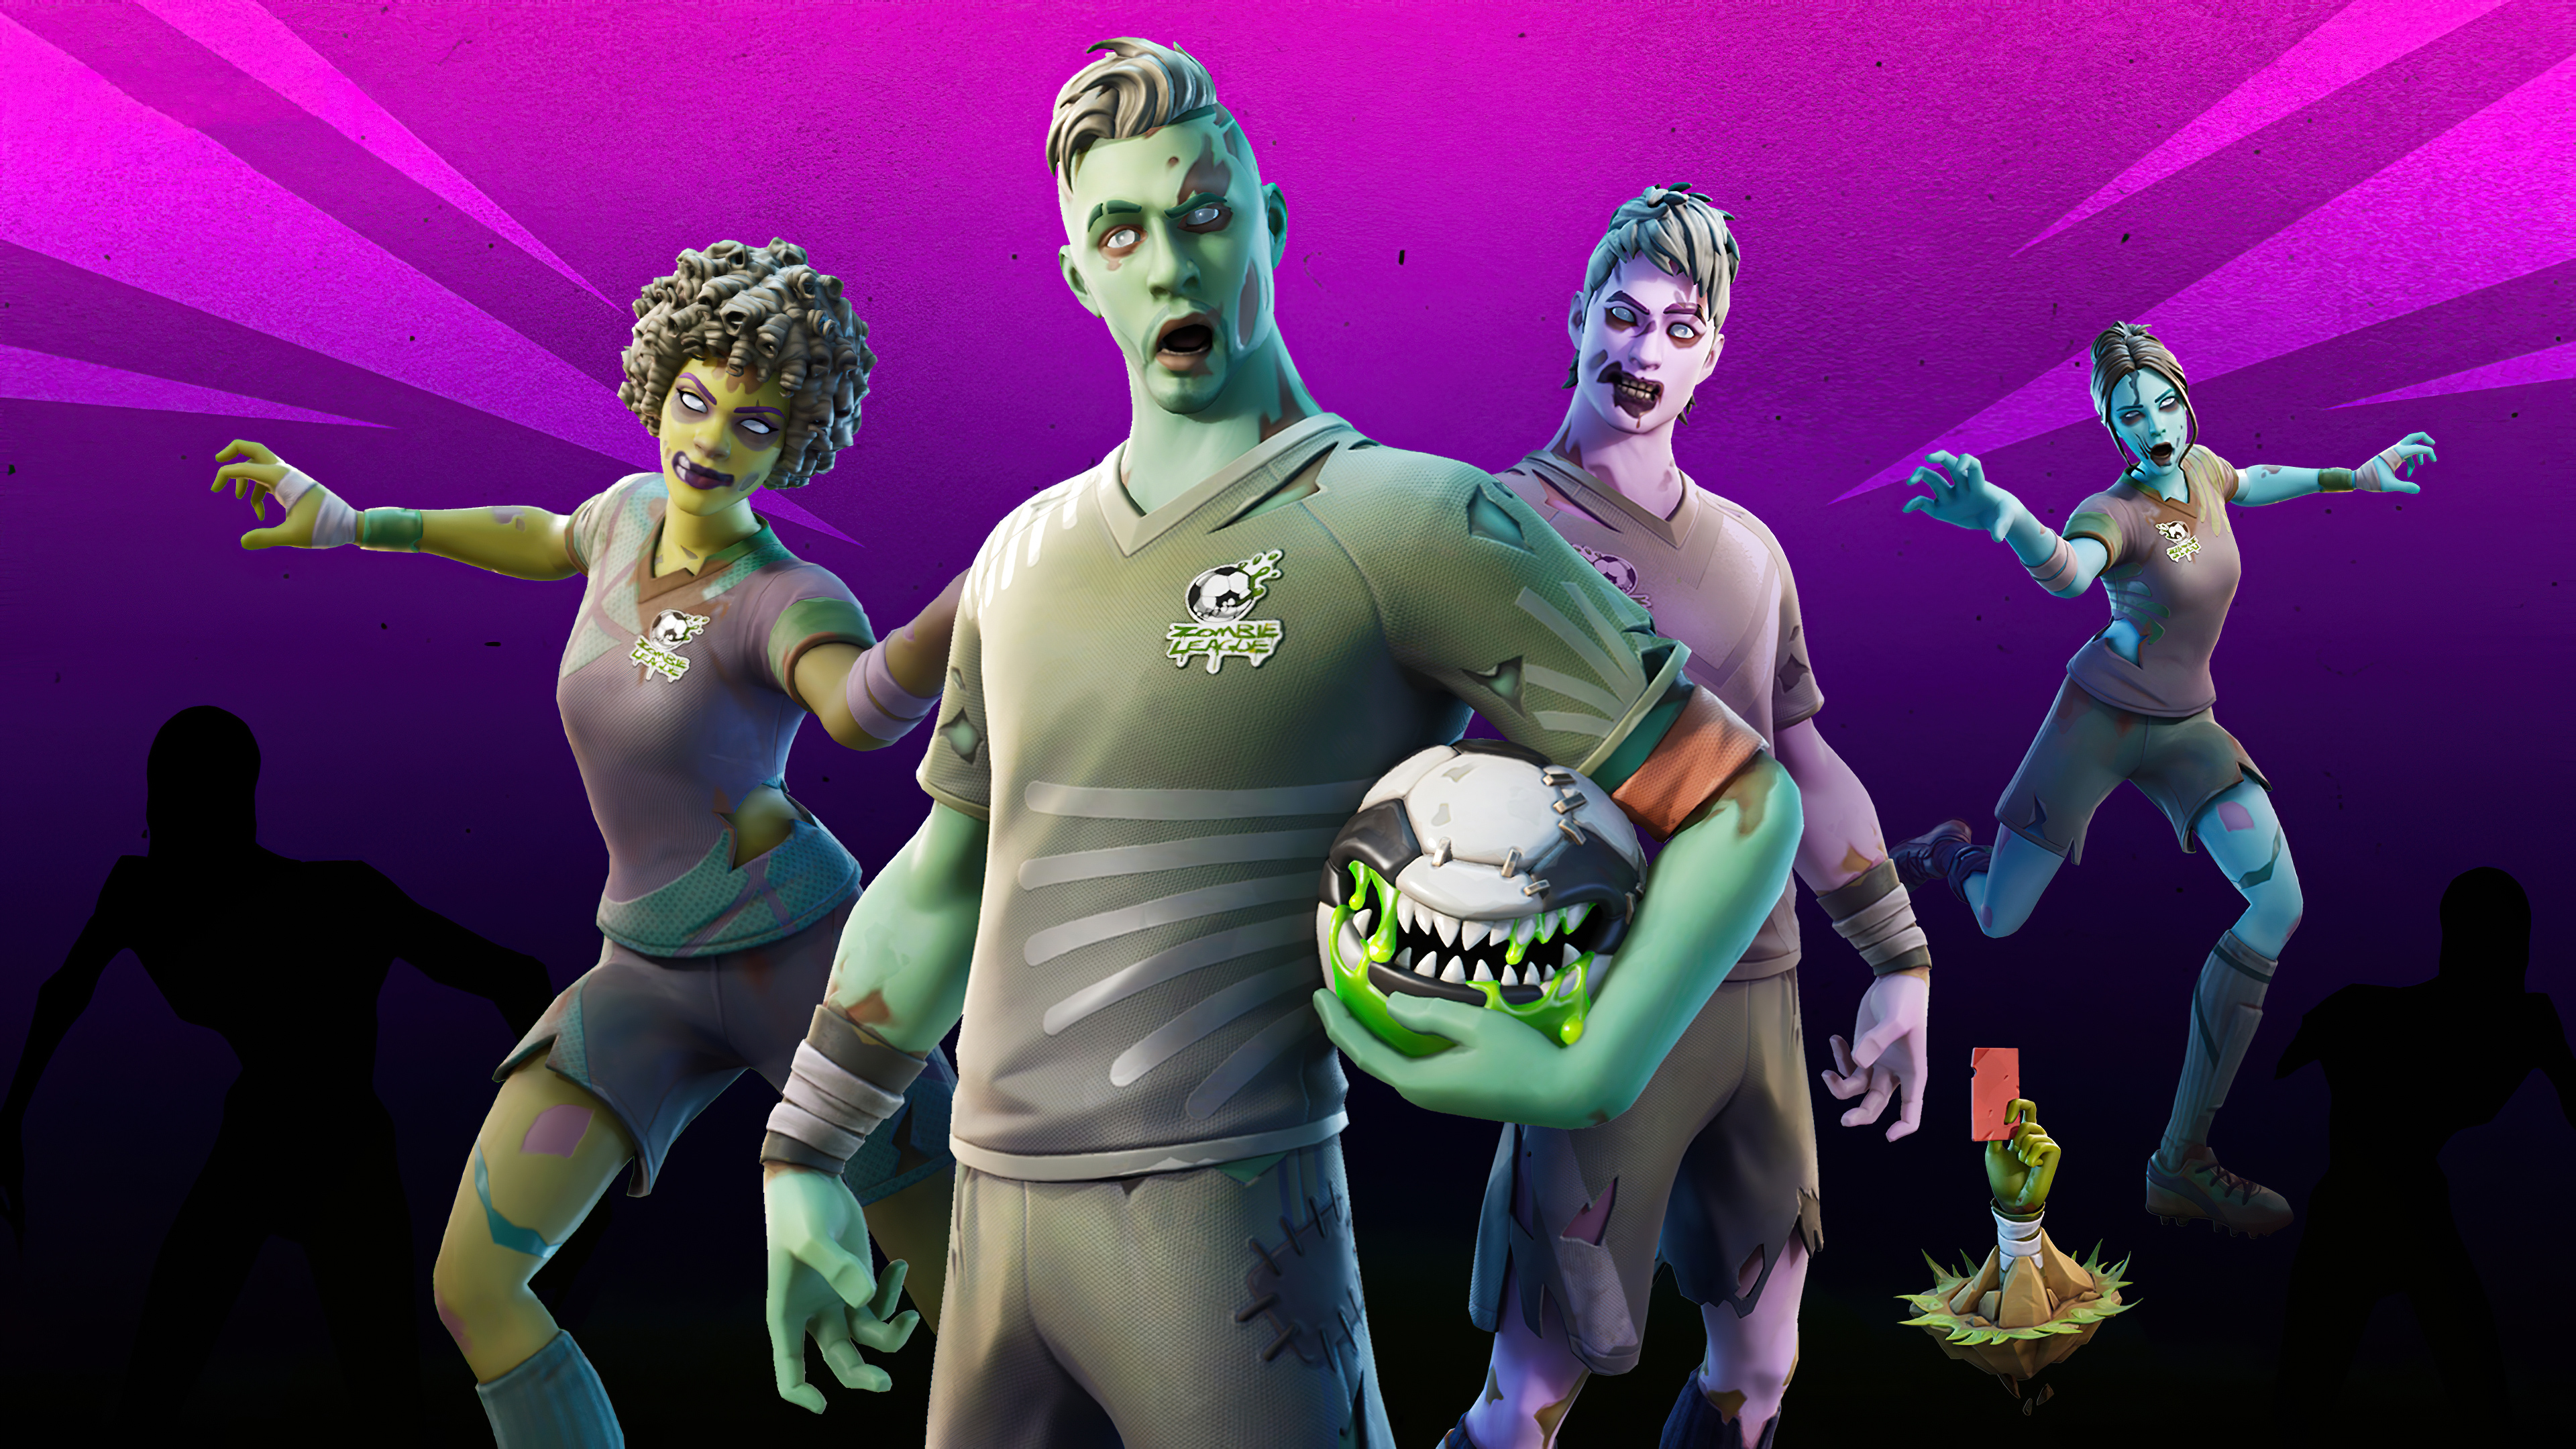 Dead Ball Fortnite 2020, HD Games, 4k Wallpapers, Image, Backgrounds, Photo...